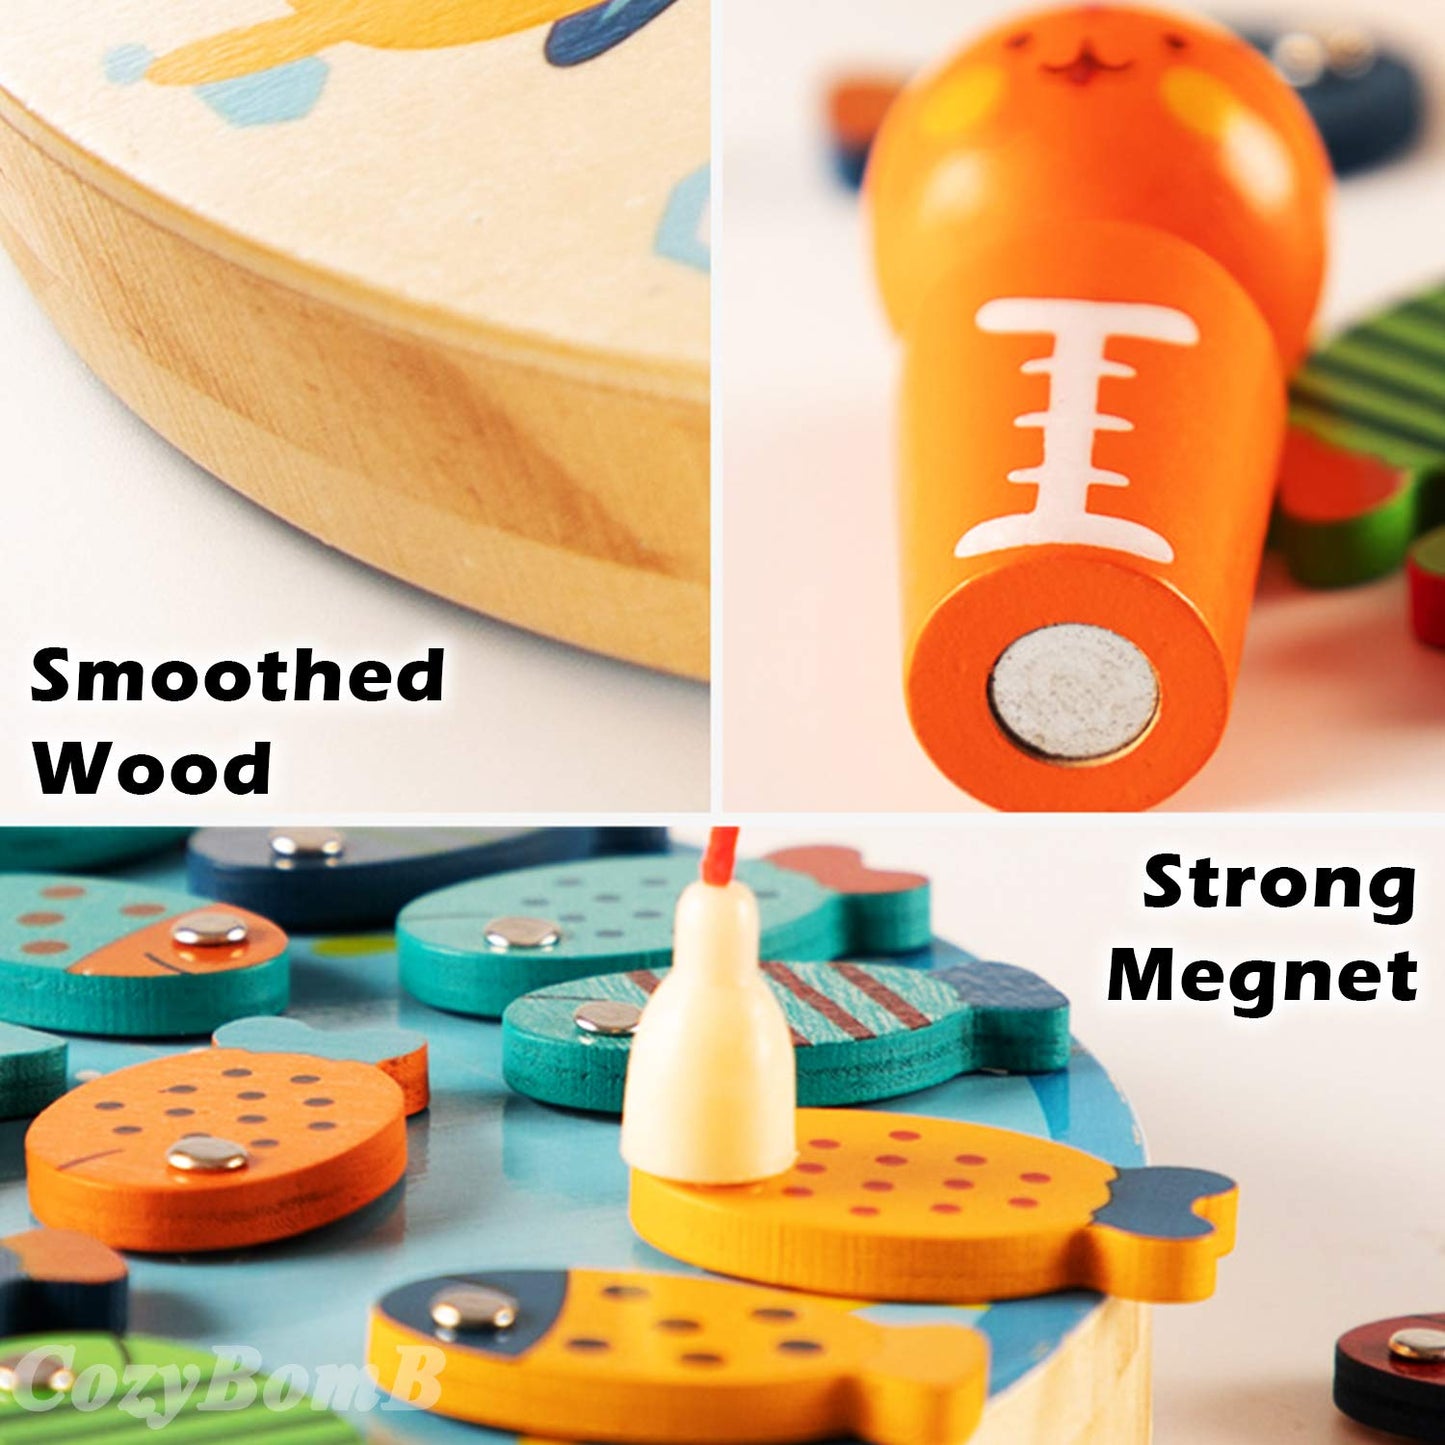 Wooden Magnetic Fishing Game | CozyBomB™